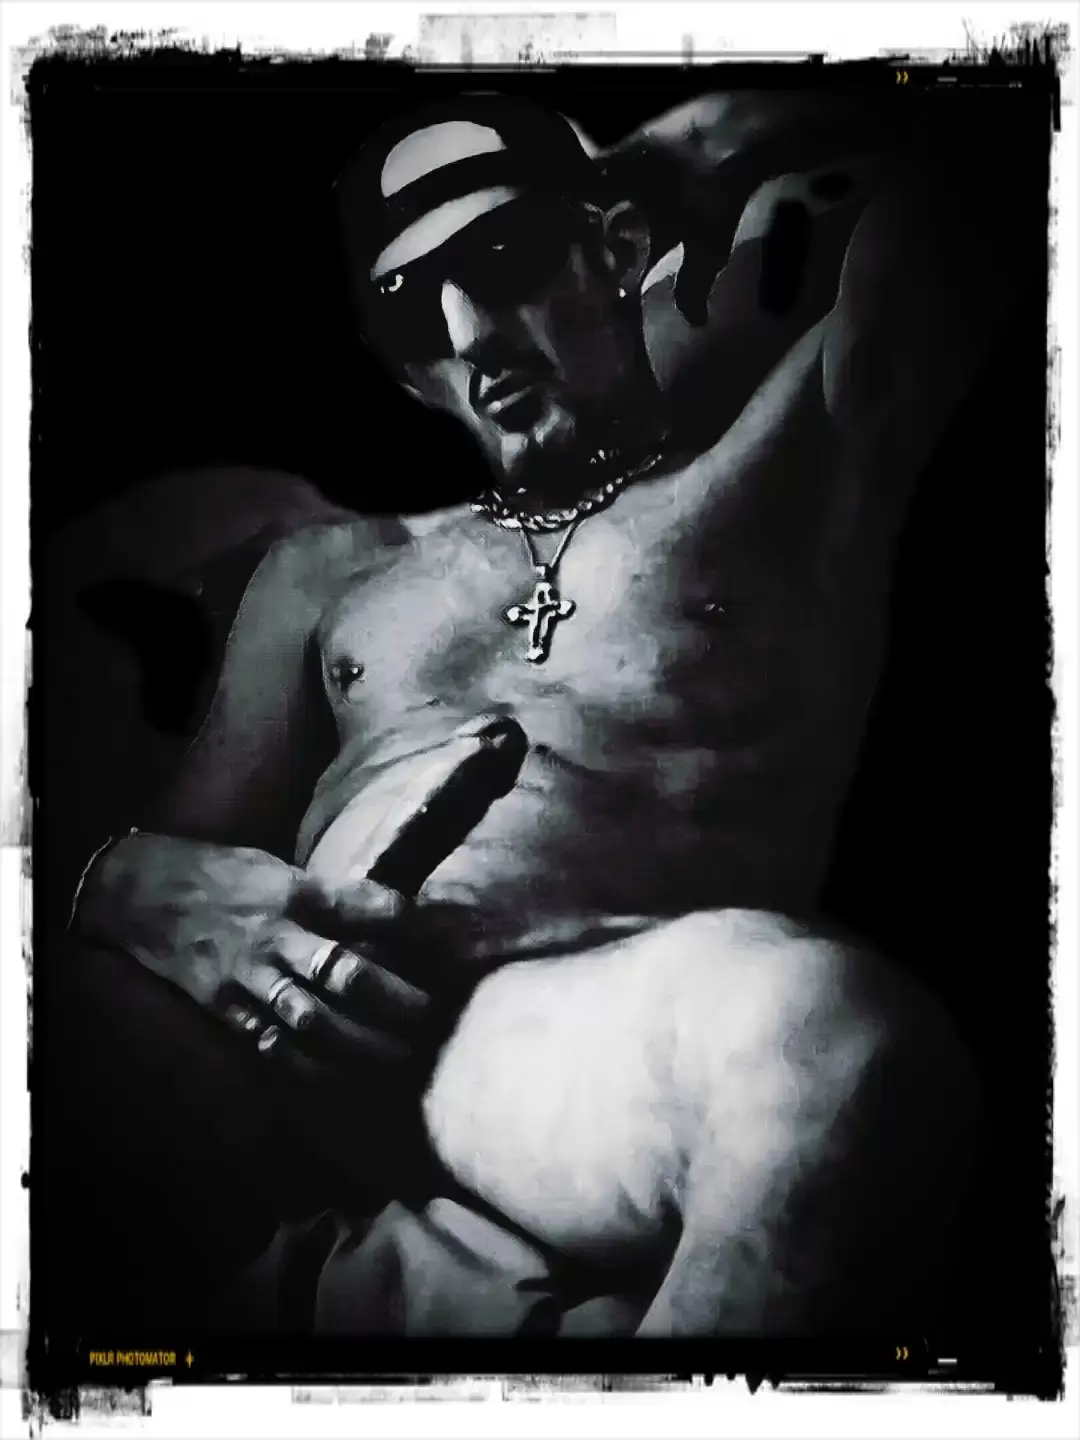 B&W photograph of a man in a seductive pose 6